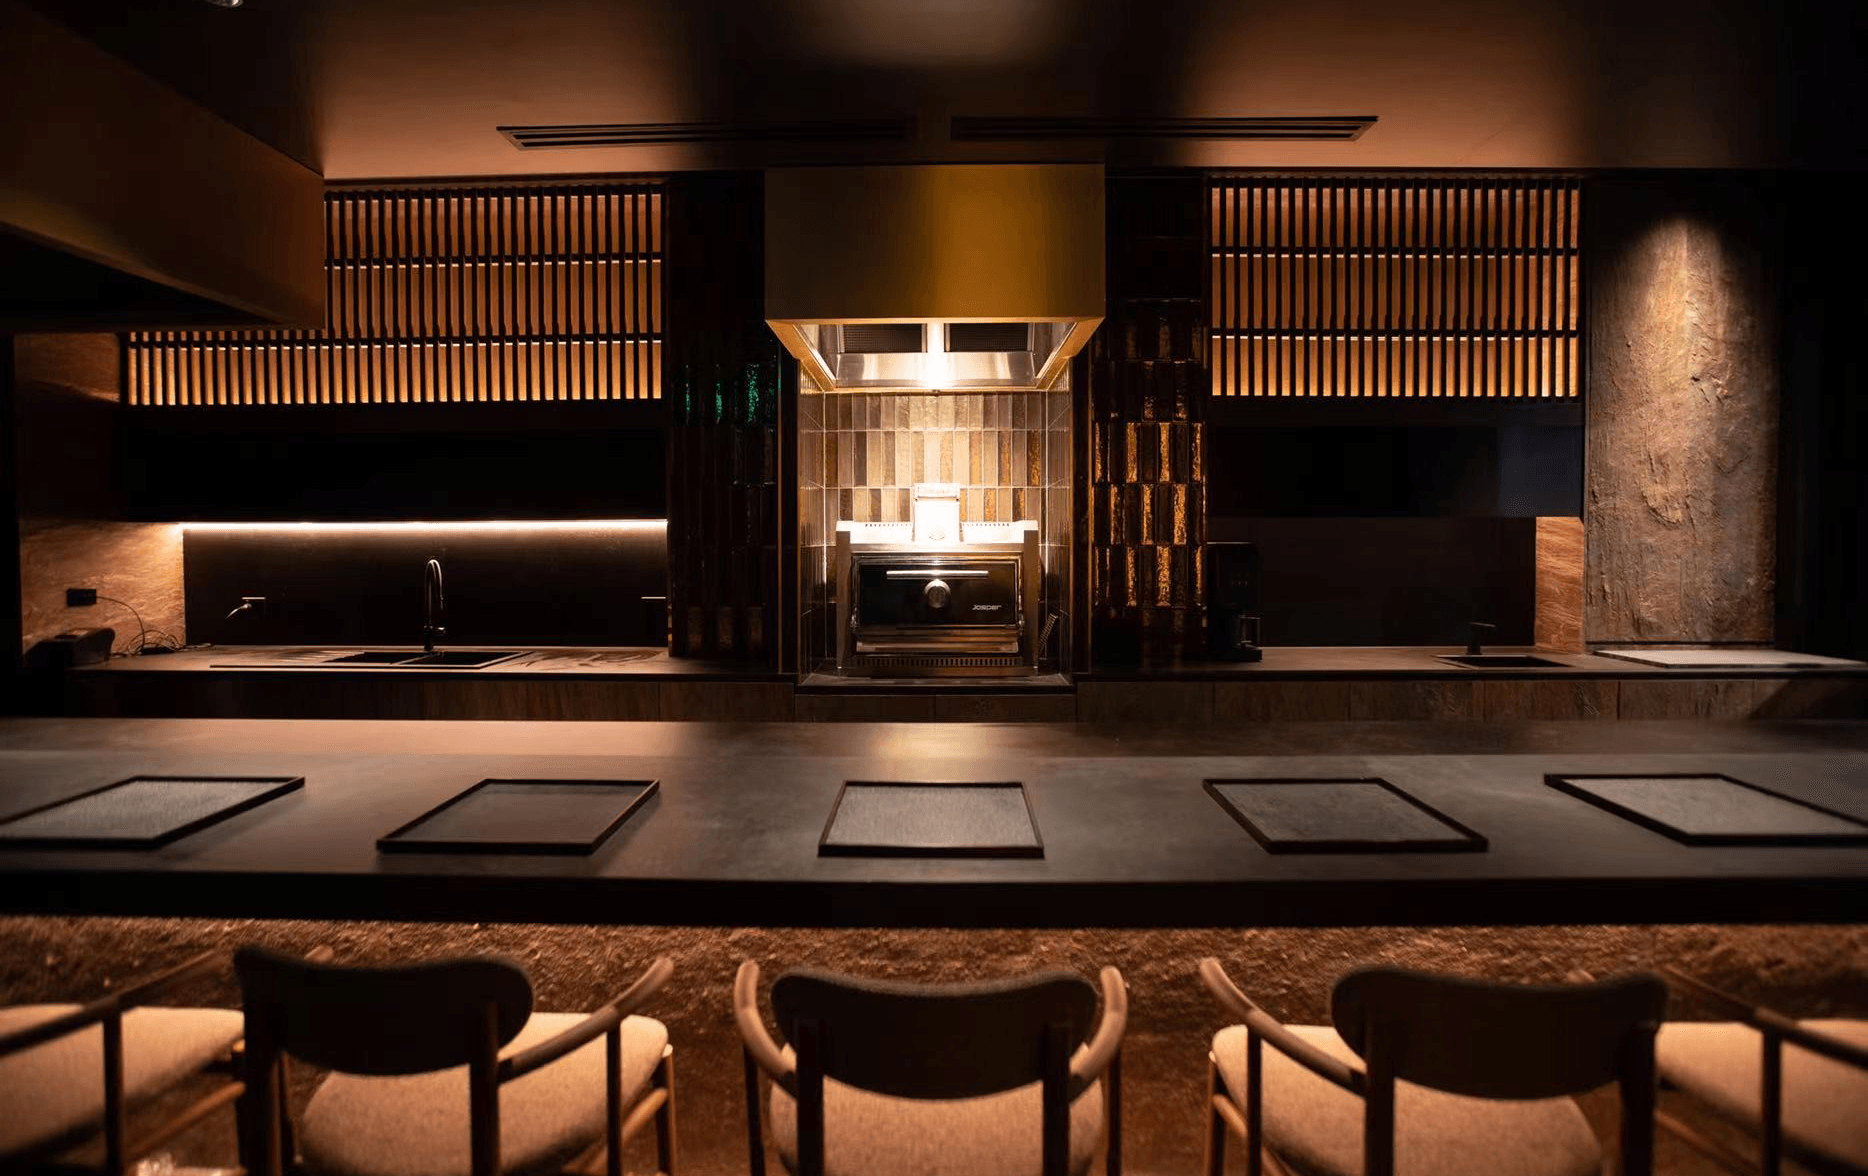 A dimly lit omakase restaurants called Yakikami, which is considered one of Melbourne's best Japanese restaurants.